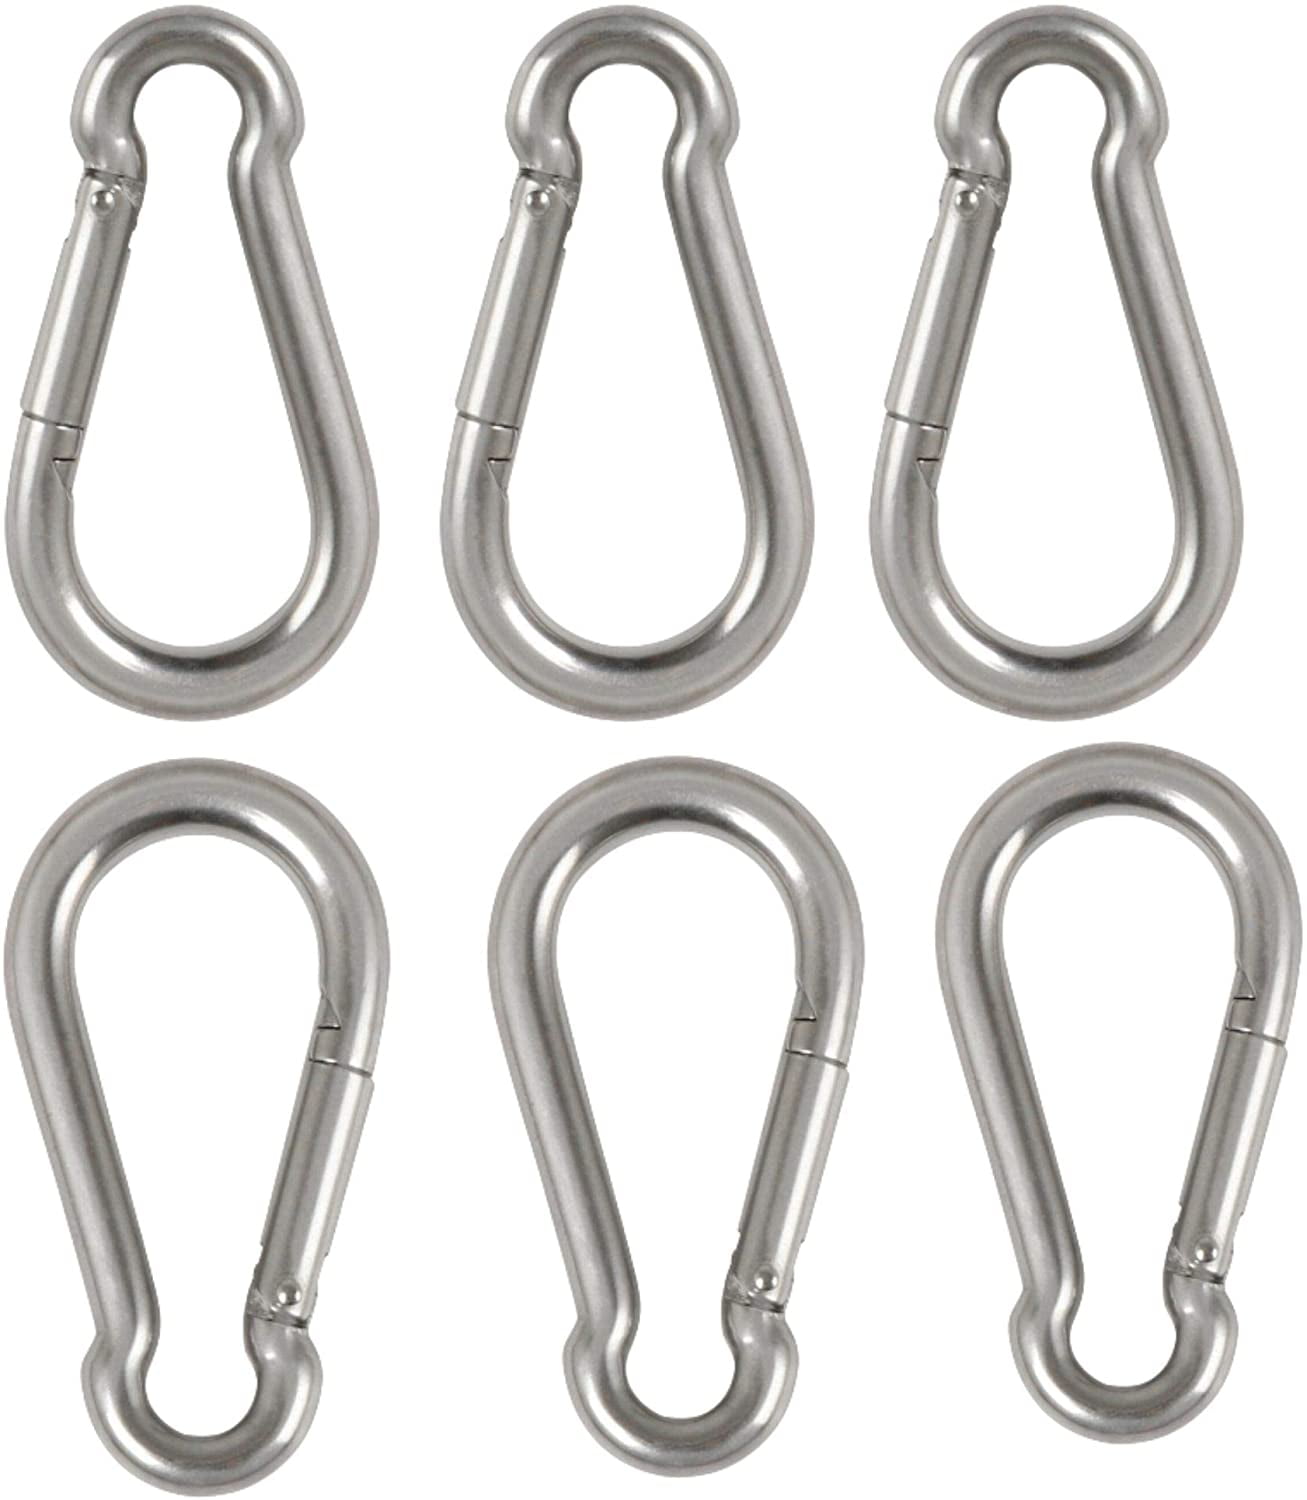 Durable Stainless Steel Clips Outdoor Living Ropes Spring Snap Hook Carabiner 